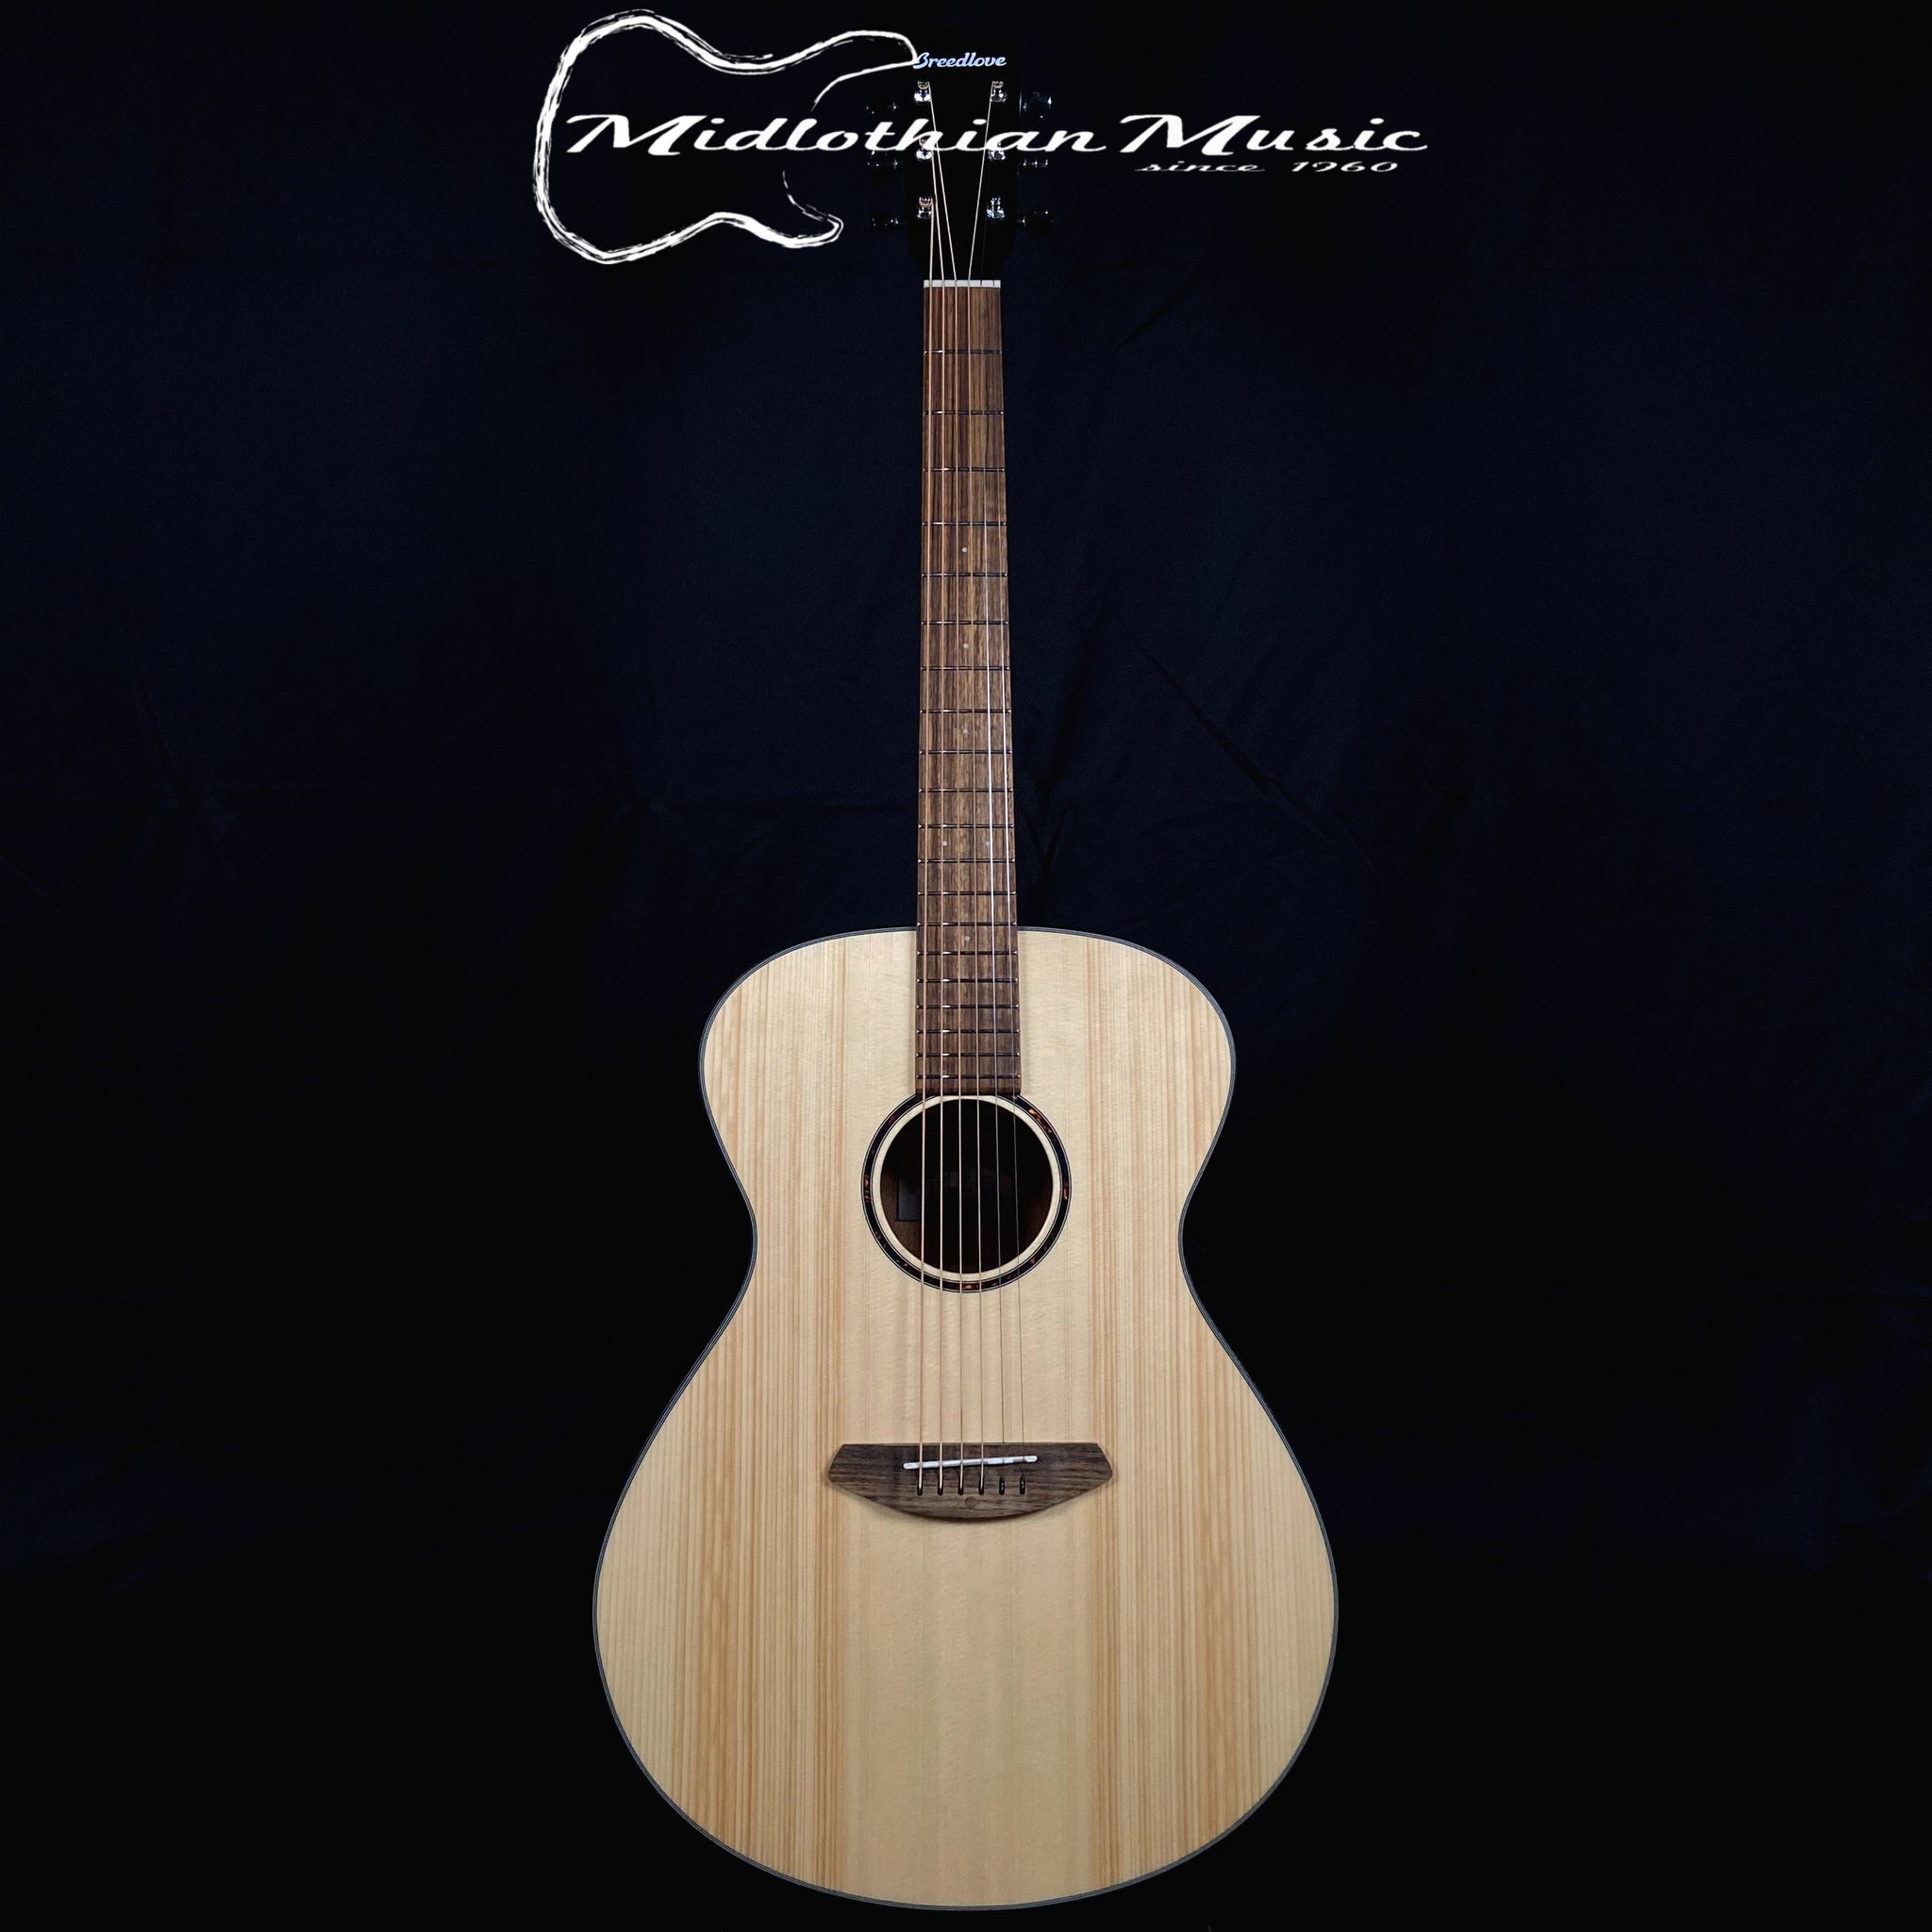 Breedlove ECO Discovery S Concerto Acoustic Guitar - Natural Satin Finish